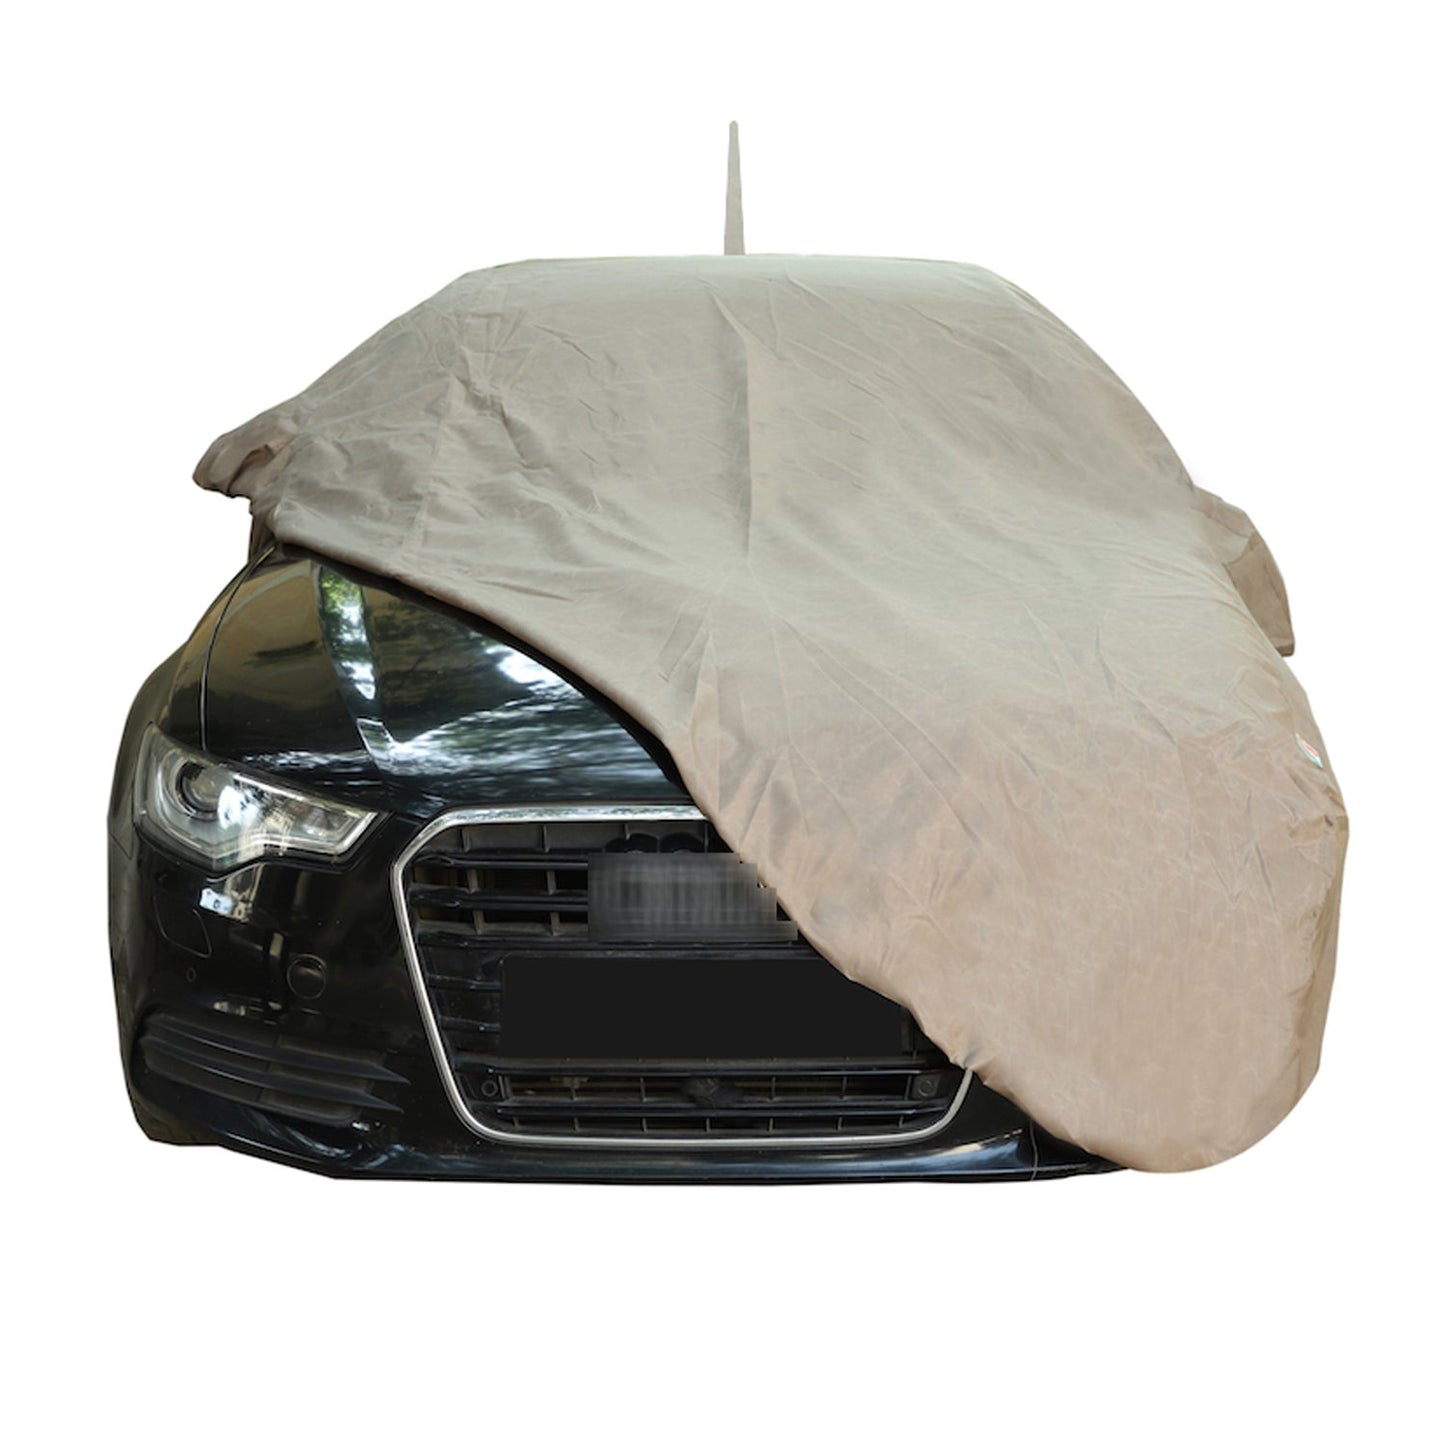 Oshotto Brown 100% Waterproof Car Body Cover with Mirror Pockets For Toyota Glanza (with Antenna Pockets)